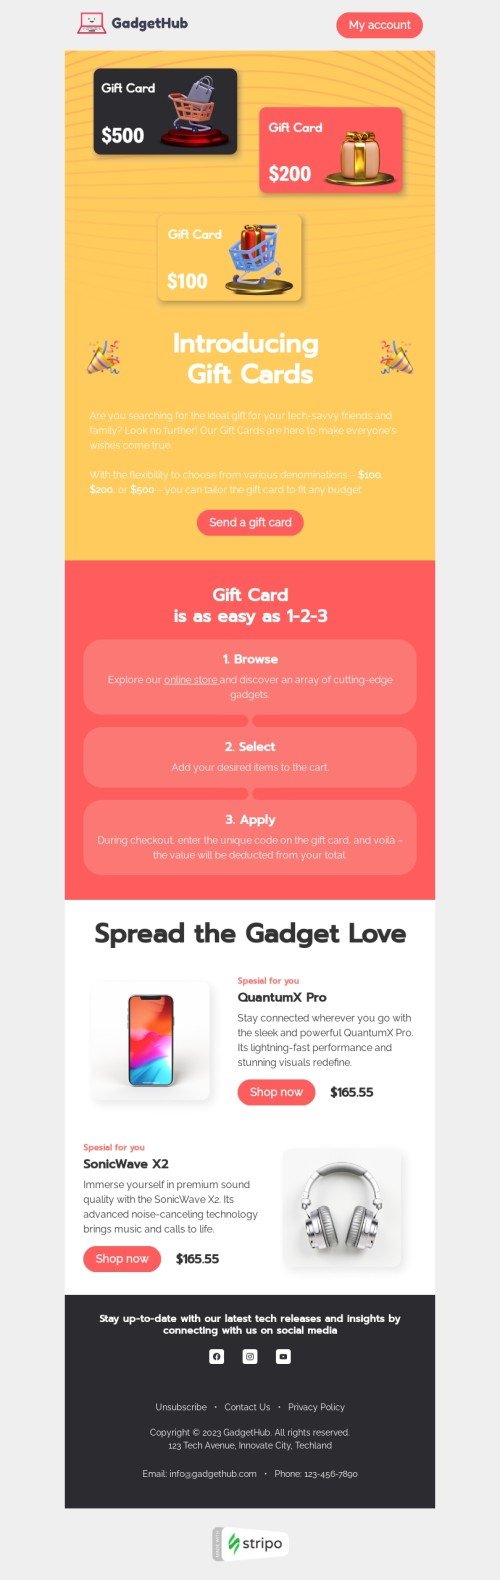 Gift сard email template "Introducing gift cards" for gadgets industry mobile view